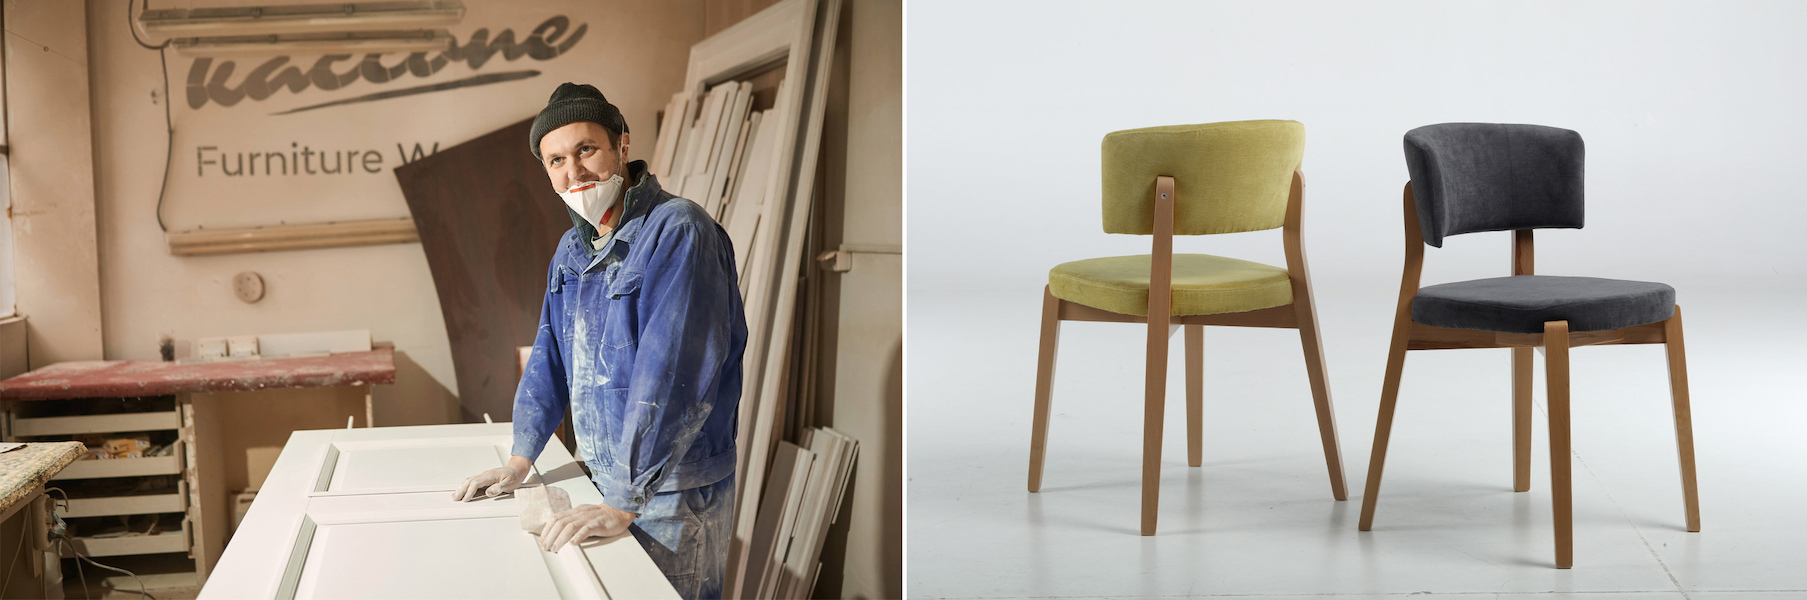 Left, a worker at the Cassone home and commercial furnishings factory in Ukraine; Right, chairs made by the 110-year-old Ukrainian company Tivoli, which has arranged a trip for several of its fellow Ukrainian manufacturers to appear at the Winter Las Vegas Market Trade Show later this month. Images © and courtesy of Kiko Gaspar Communications